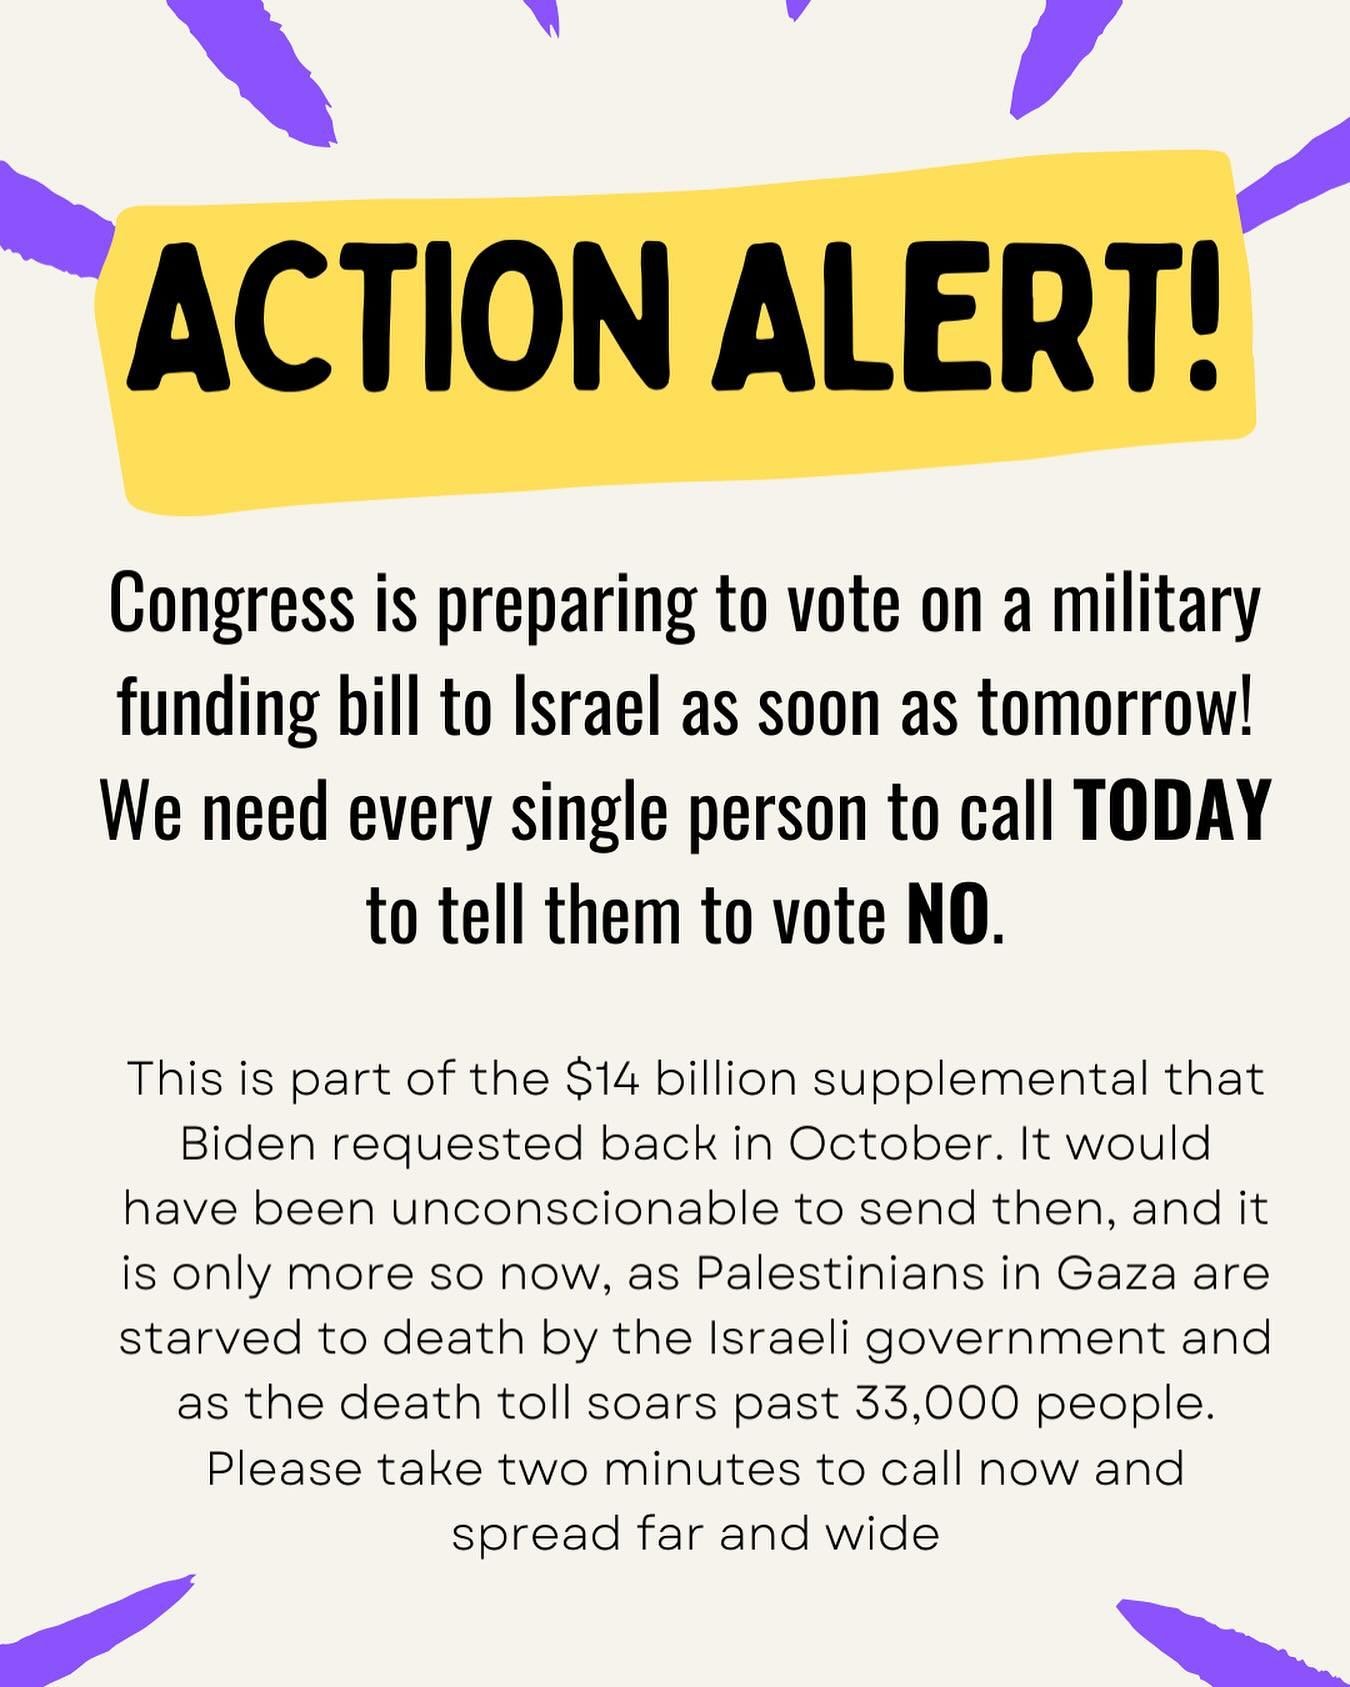 🚨 ACTION ALERT 🚨

Congress is preparing to vote on a military funding bill to Israel as soon as tomorrow! We need every single person to call TODAY to tell them to vote NO.

This is part of the $14 billion supplemental that Biden requested back in 